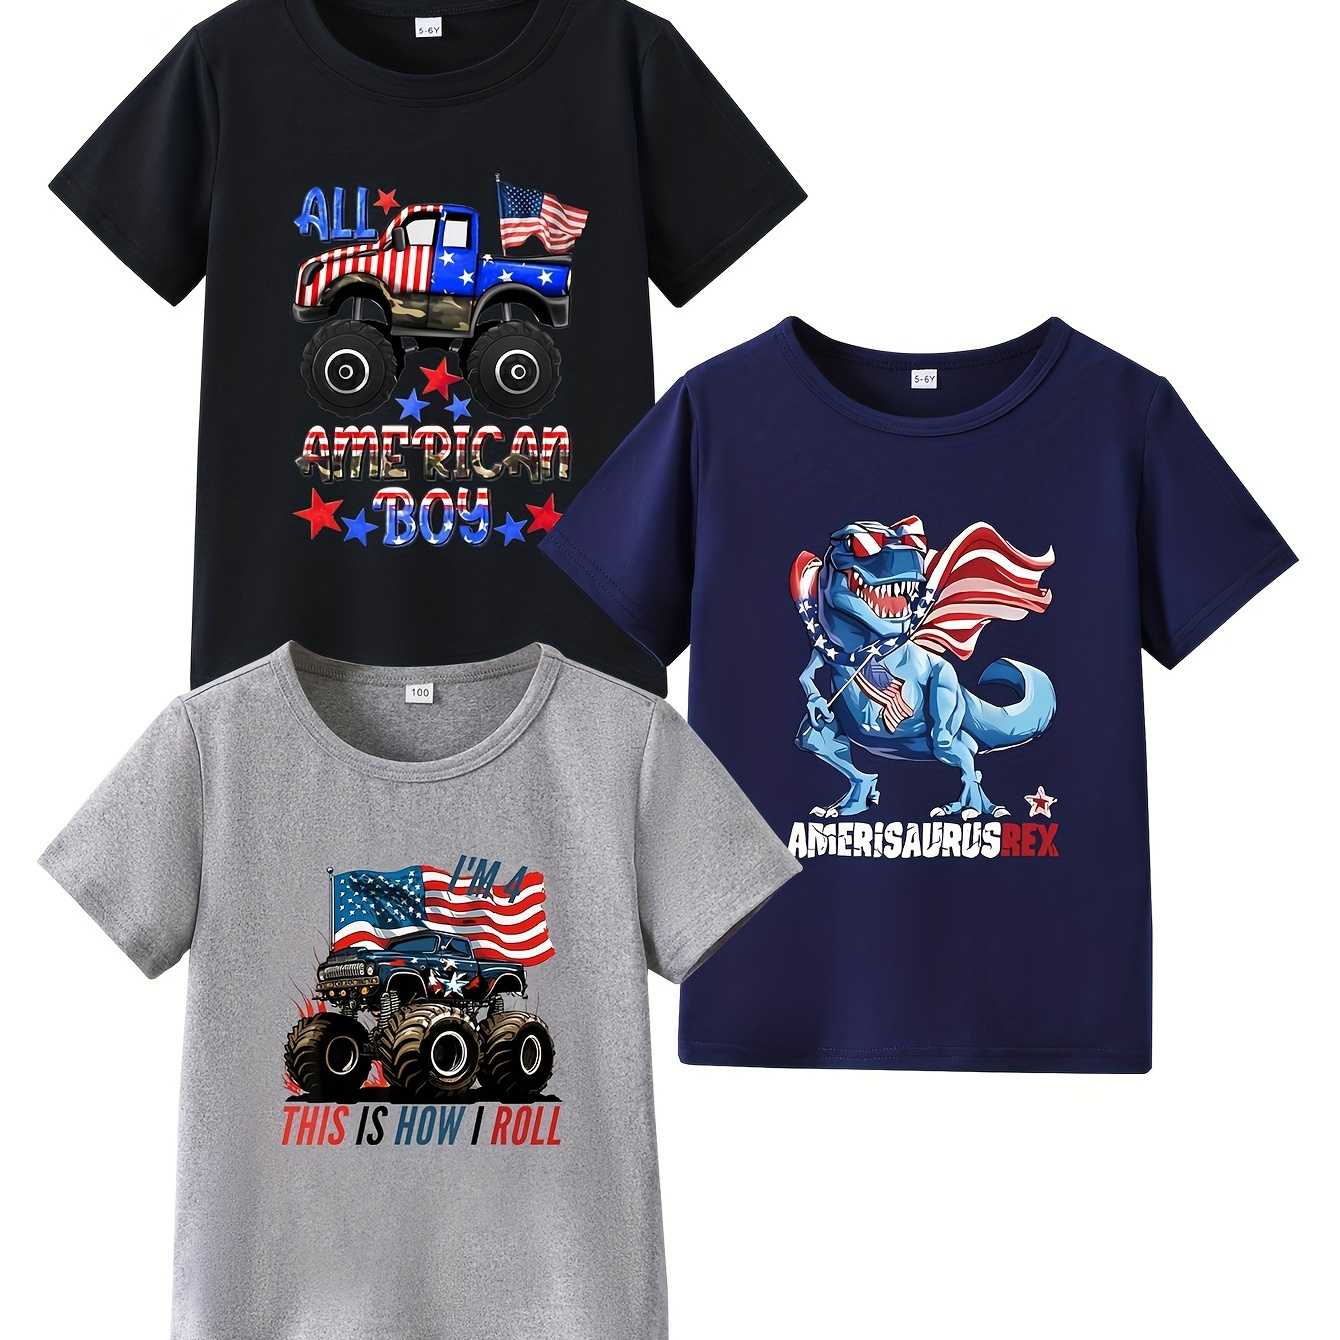 

3pcs - Casual Comfy Boys' Summer Top - Dinosaur+truck+car Print Flag Element Pattern Short Sleeve Crew Neck T-shirt Independence Day Gift